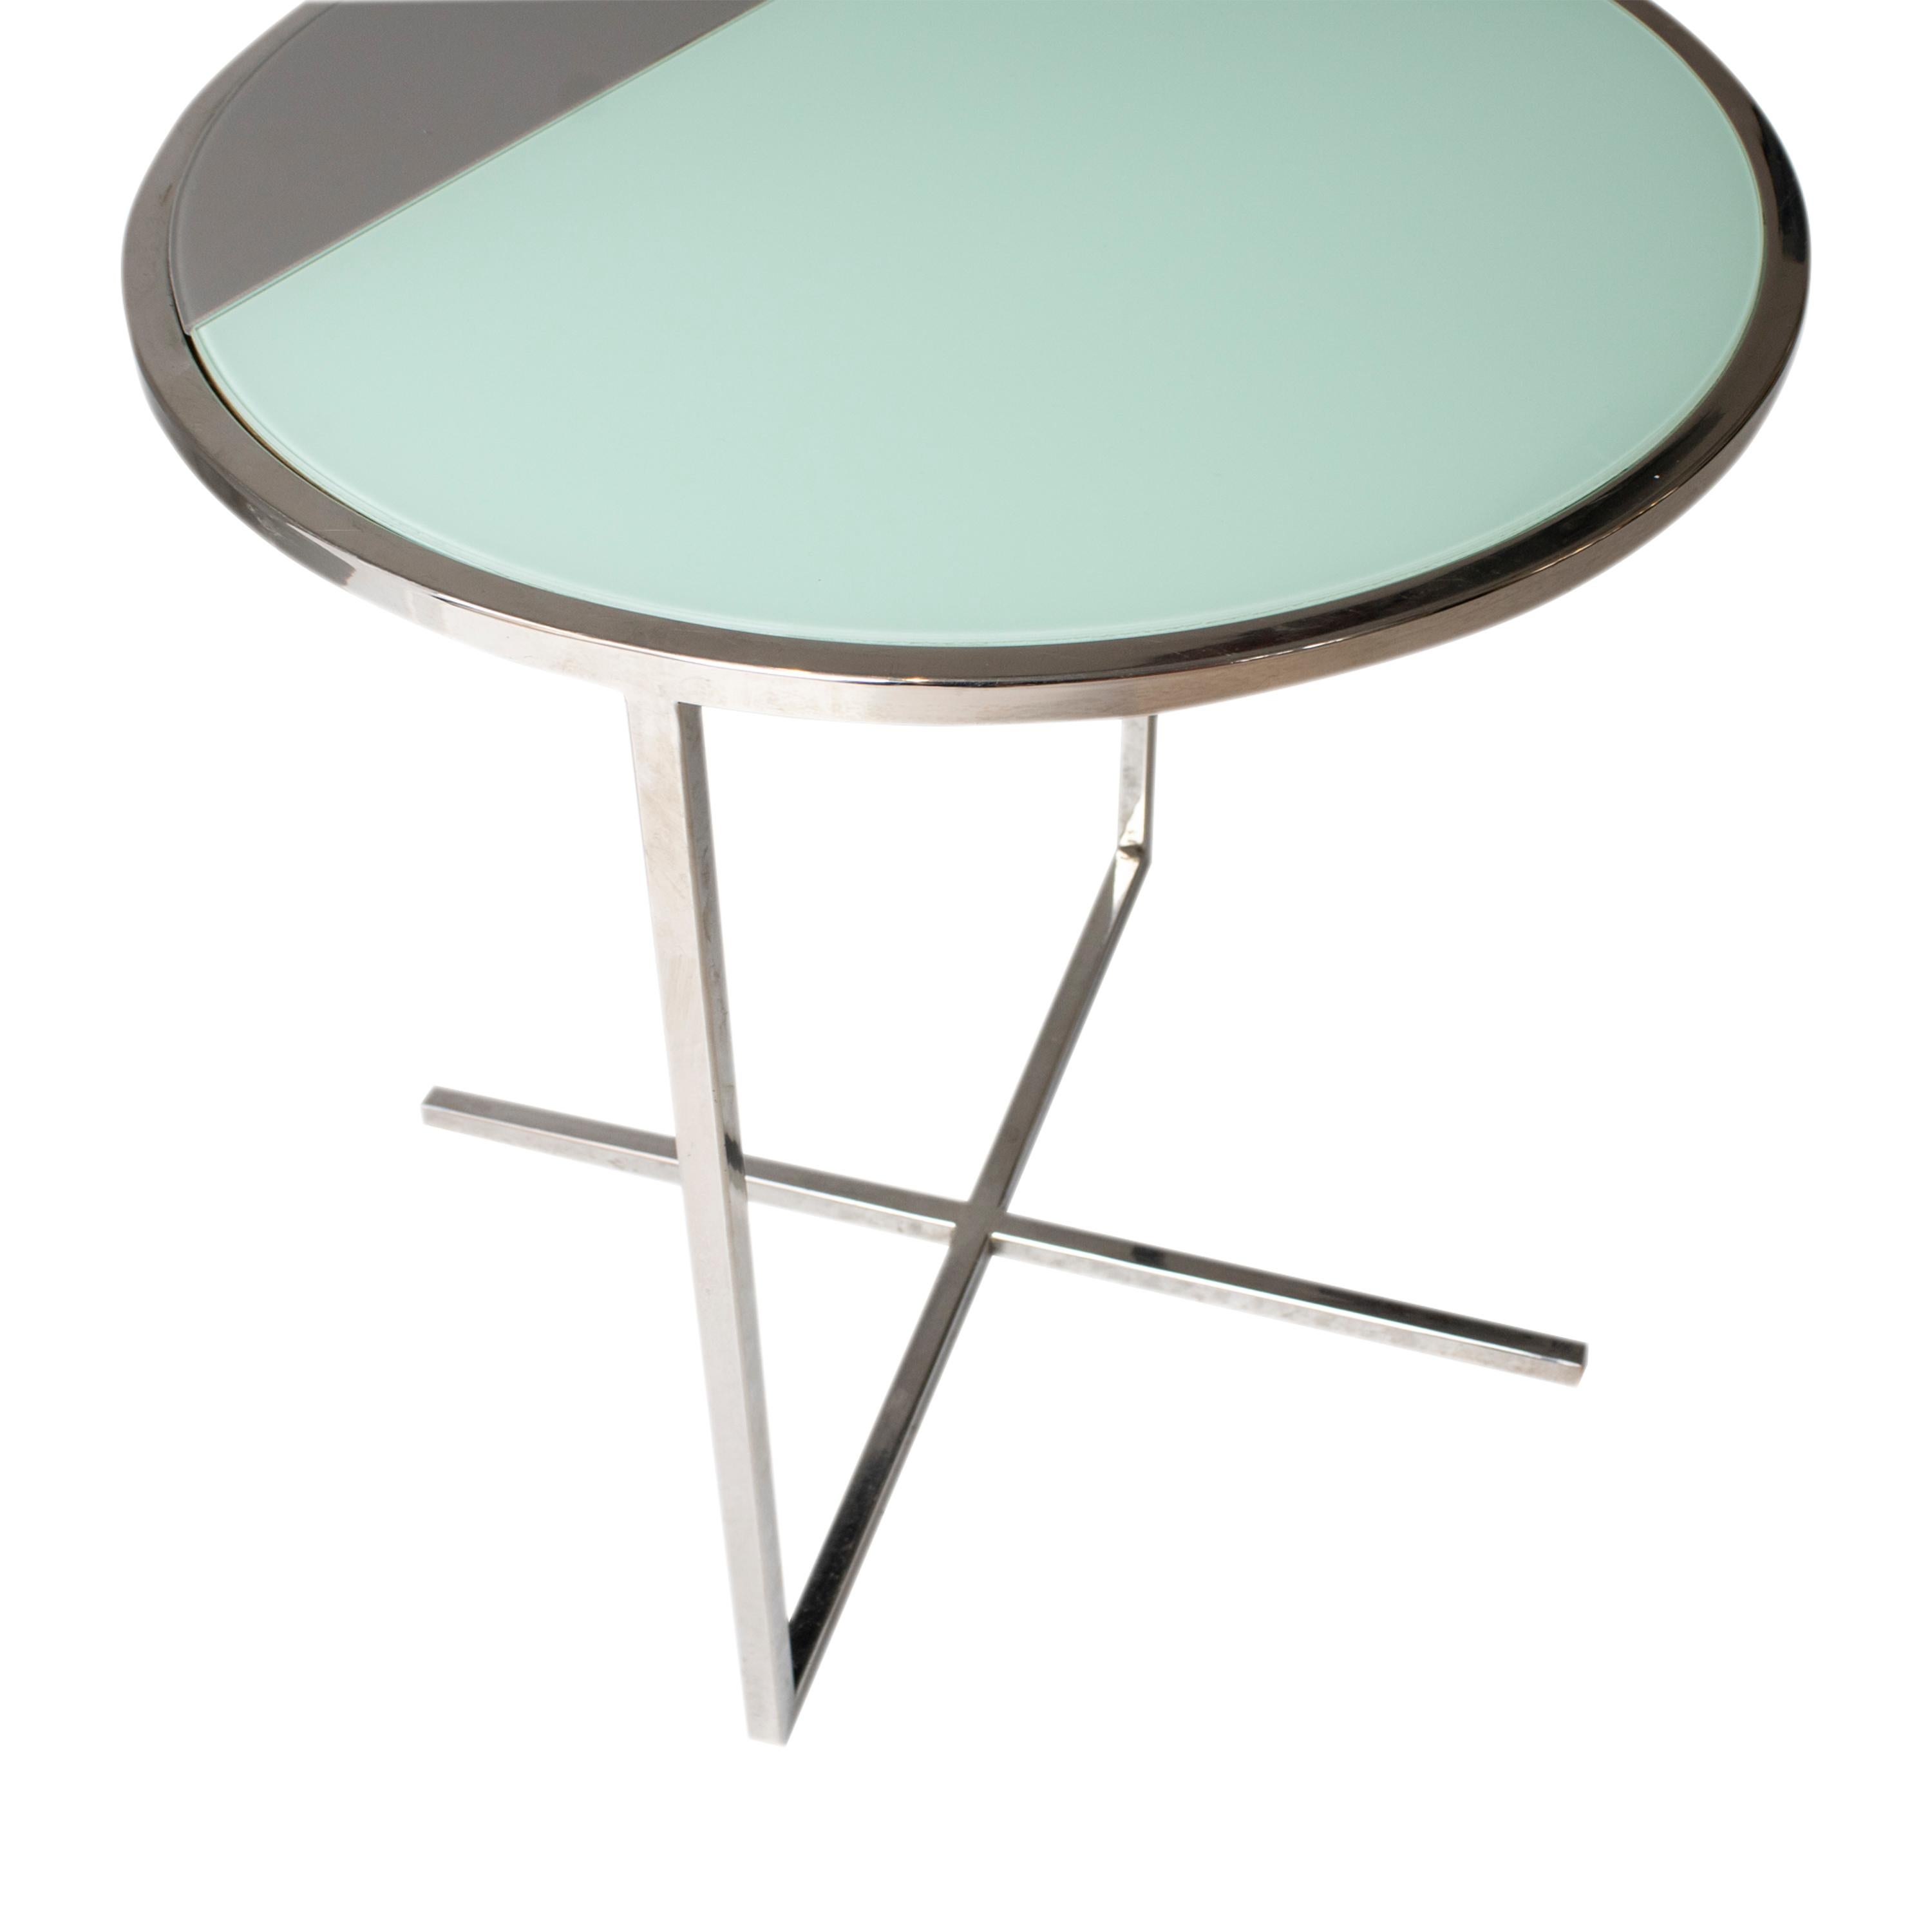 Spanish Contemporary Chromed Steel Green and Grey Glass Round Center Table, Italy, 1970 For Sale